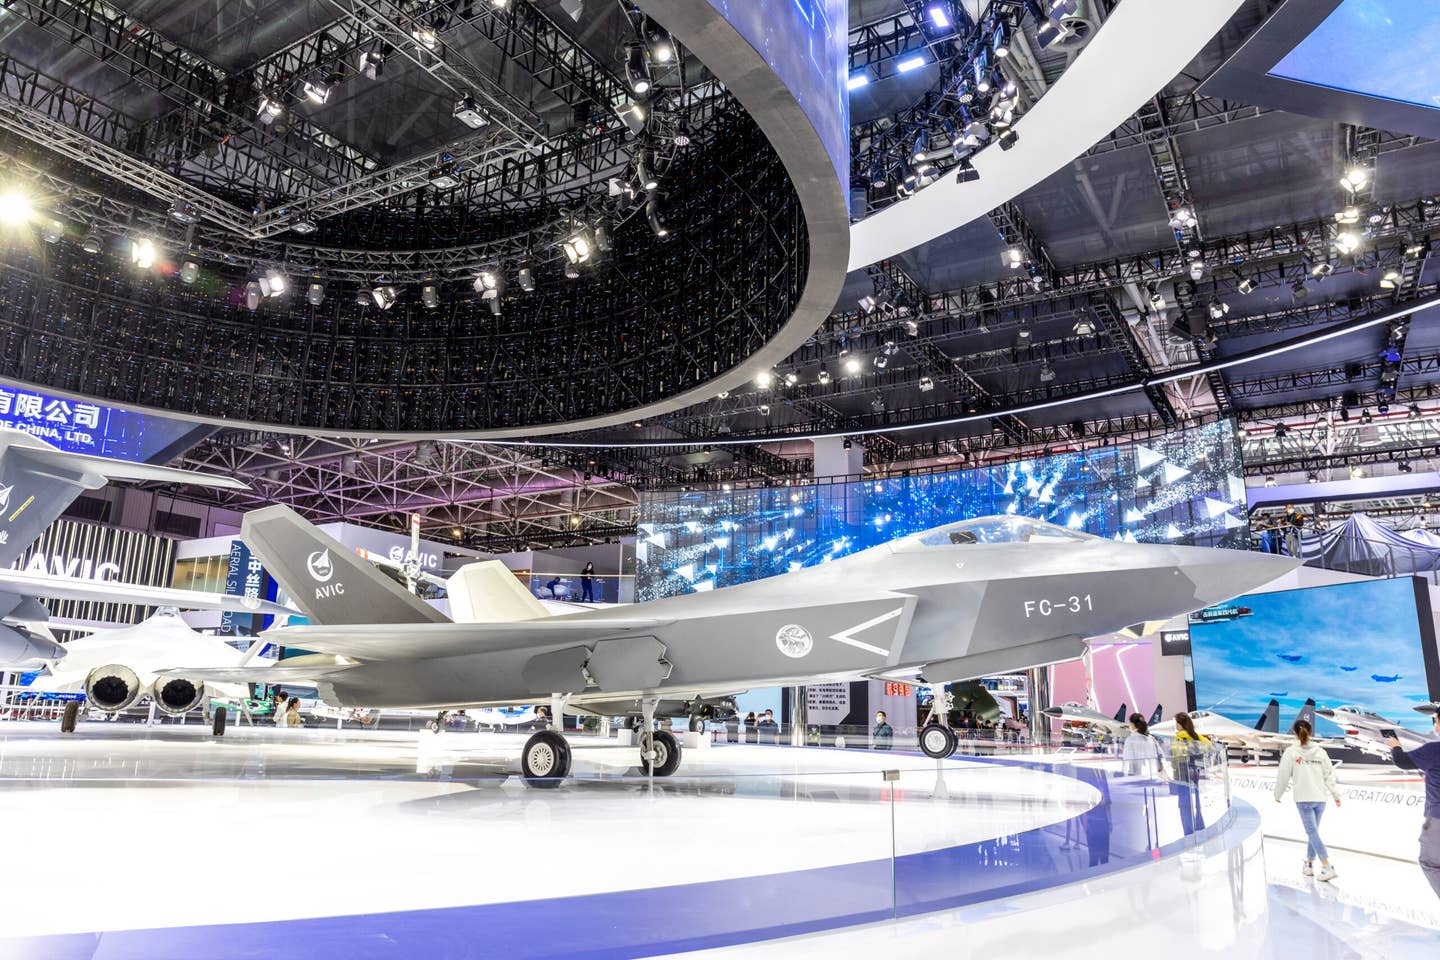 A mockup of the FC-31 stealth fighter is showcased at Airshow China 2022 on November 6, 2022, in Zhuhai, China. <em>Photo by VCG/VCG via Getty Images</em>